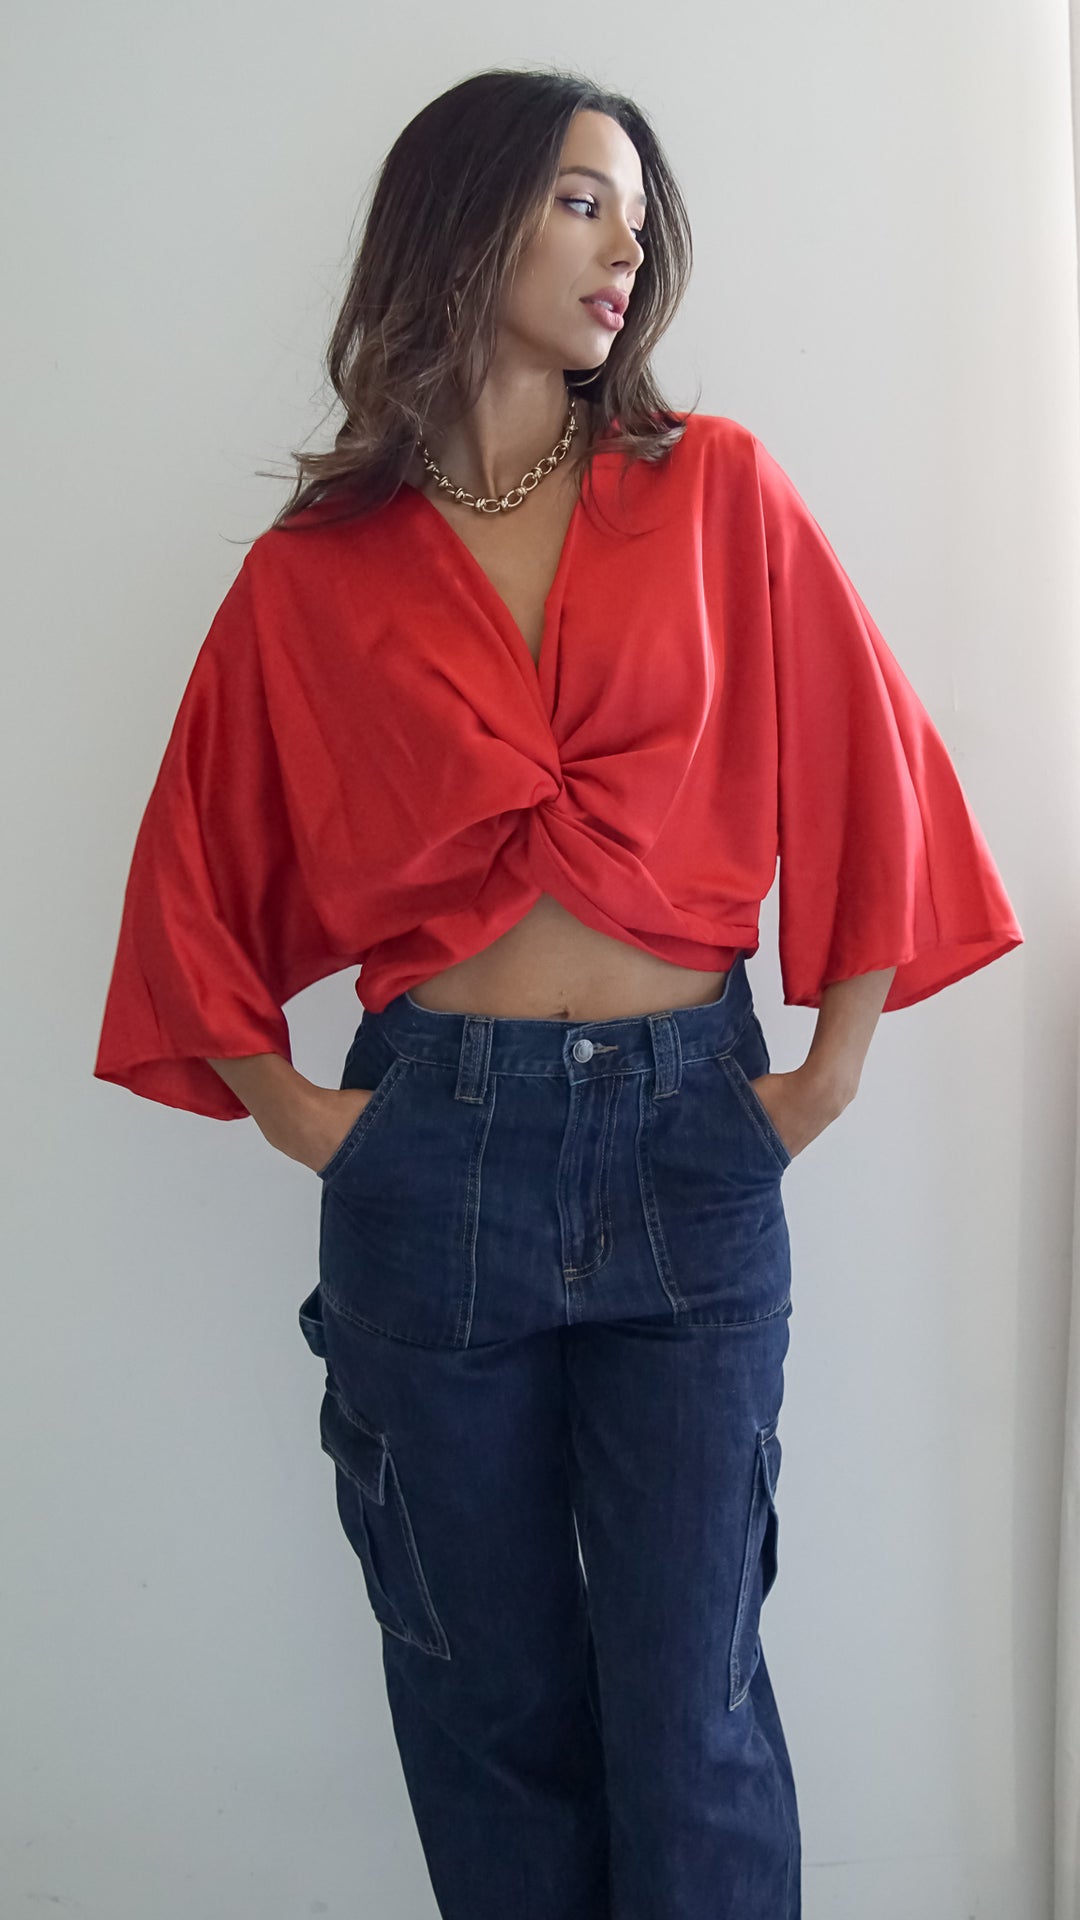 Isabelette Satin Crop Top in Red - Steps New York